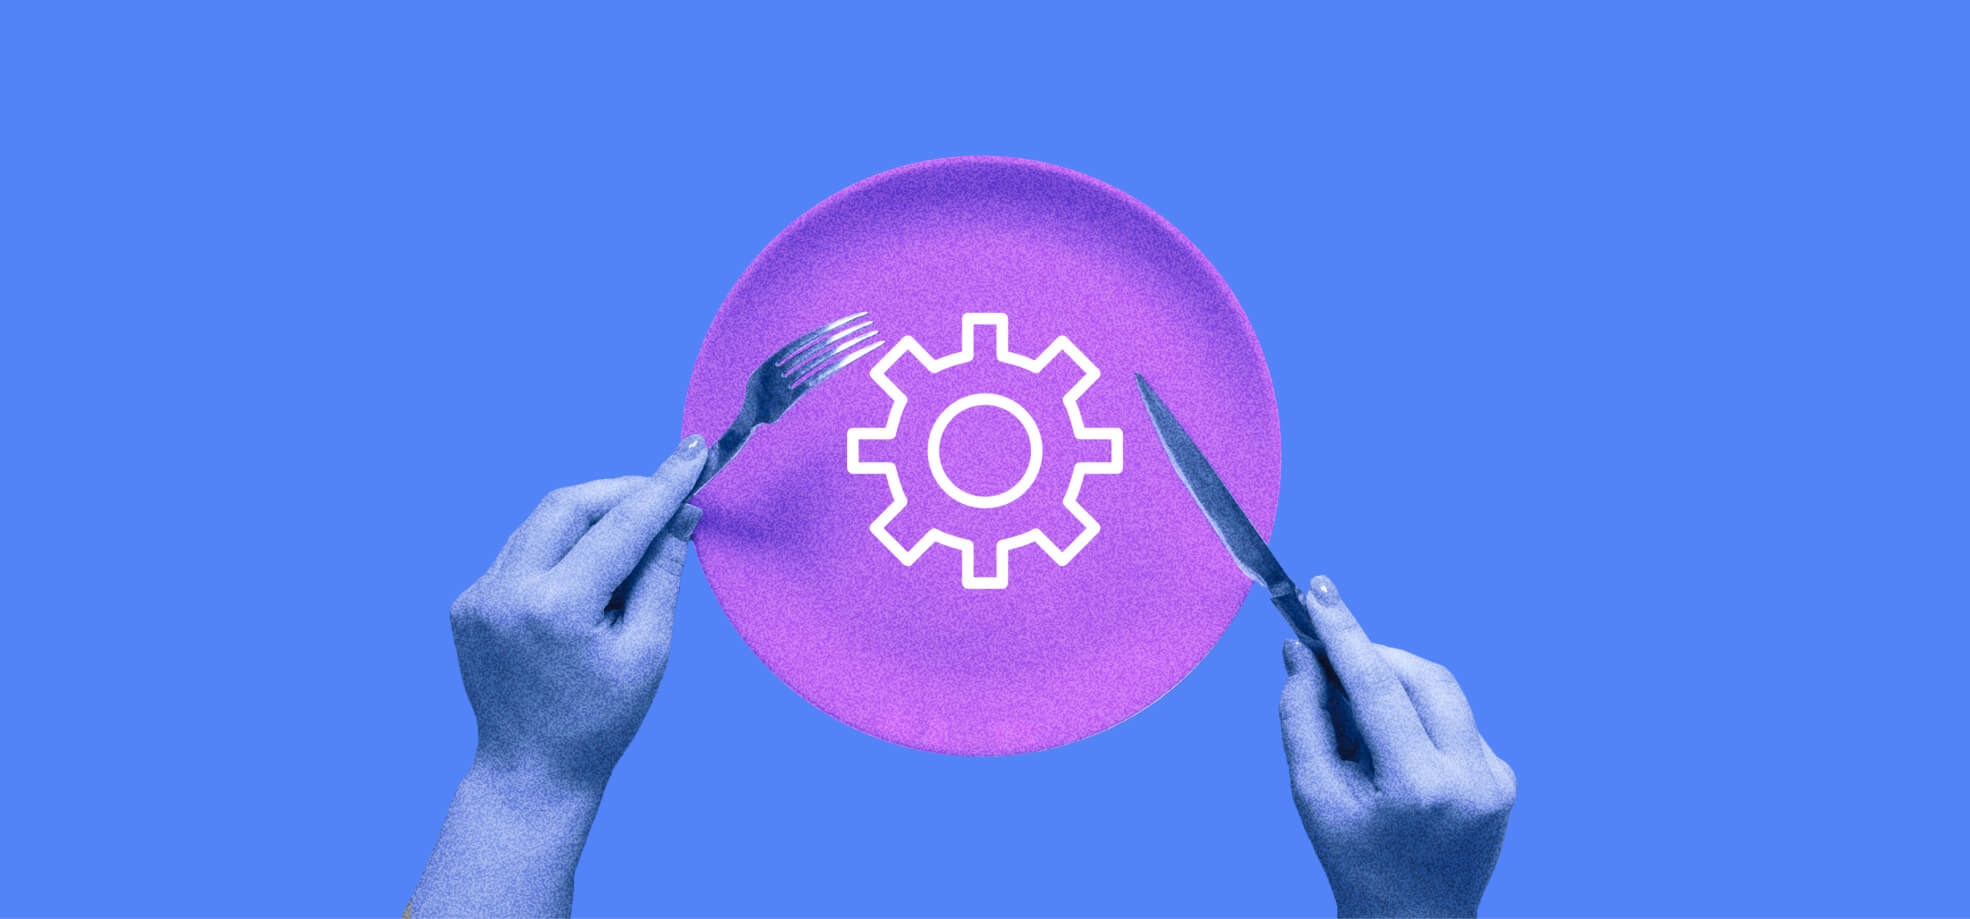 a gear icon on a plate illustration with a purple background